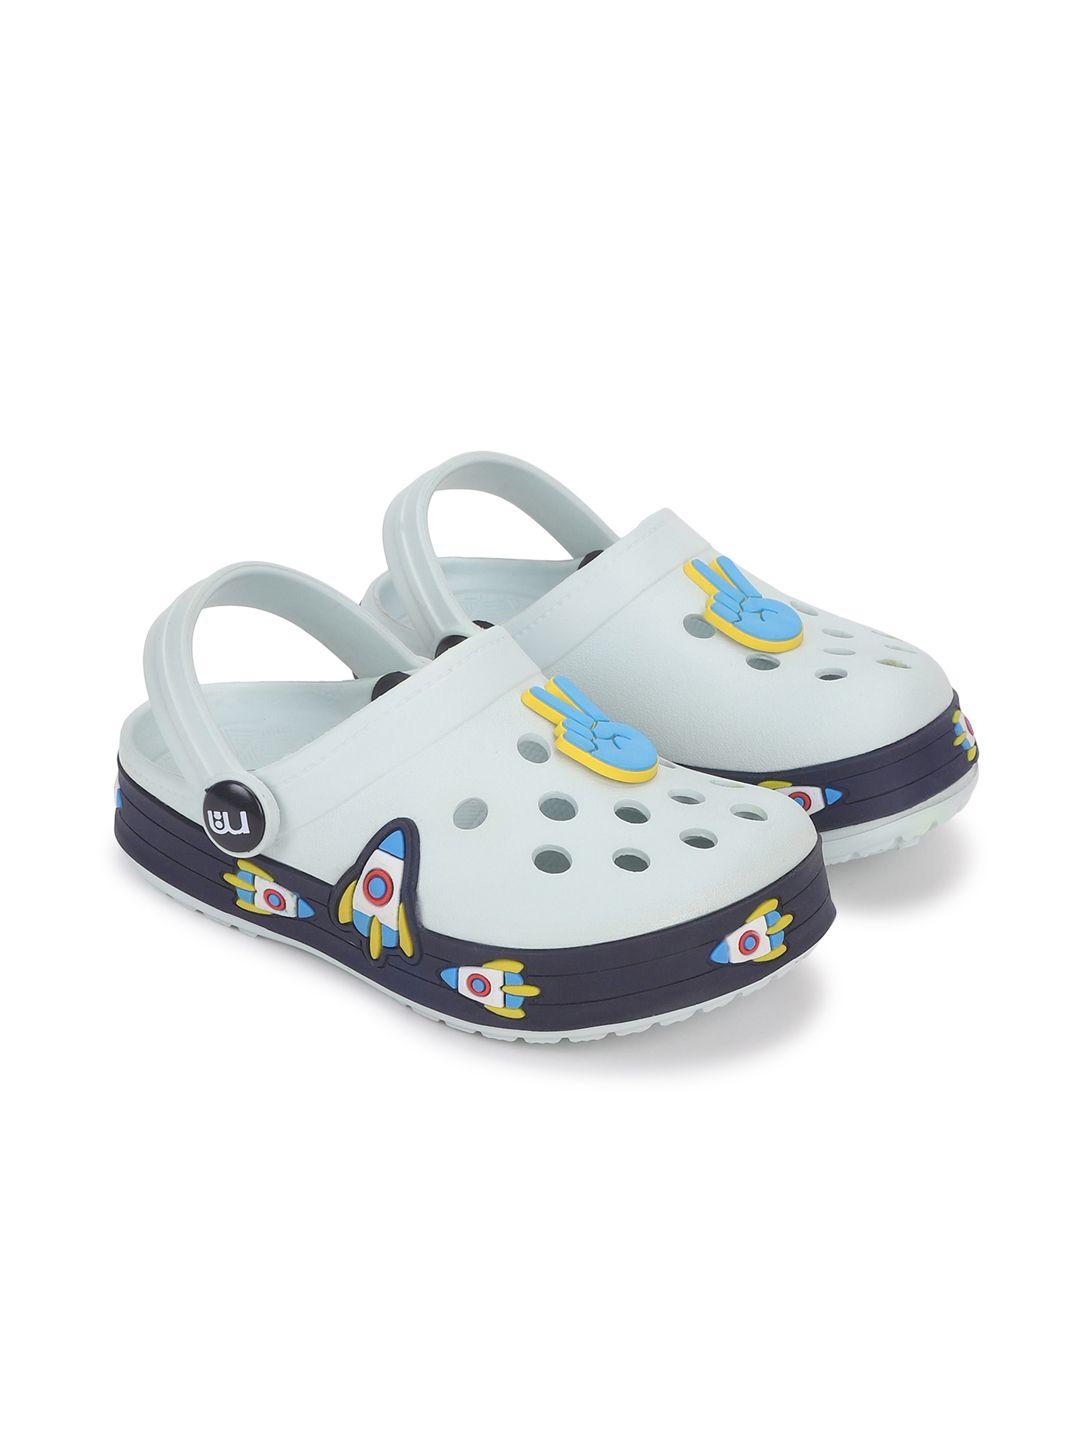 mothercare kids solid clogs with jibbitz